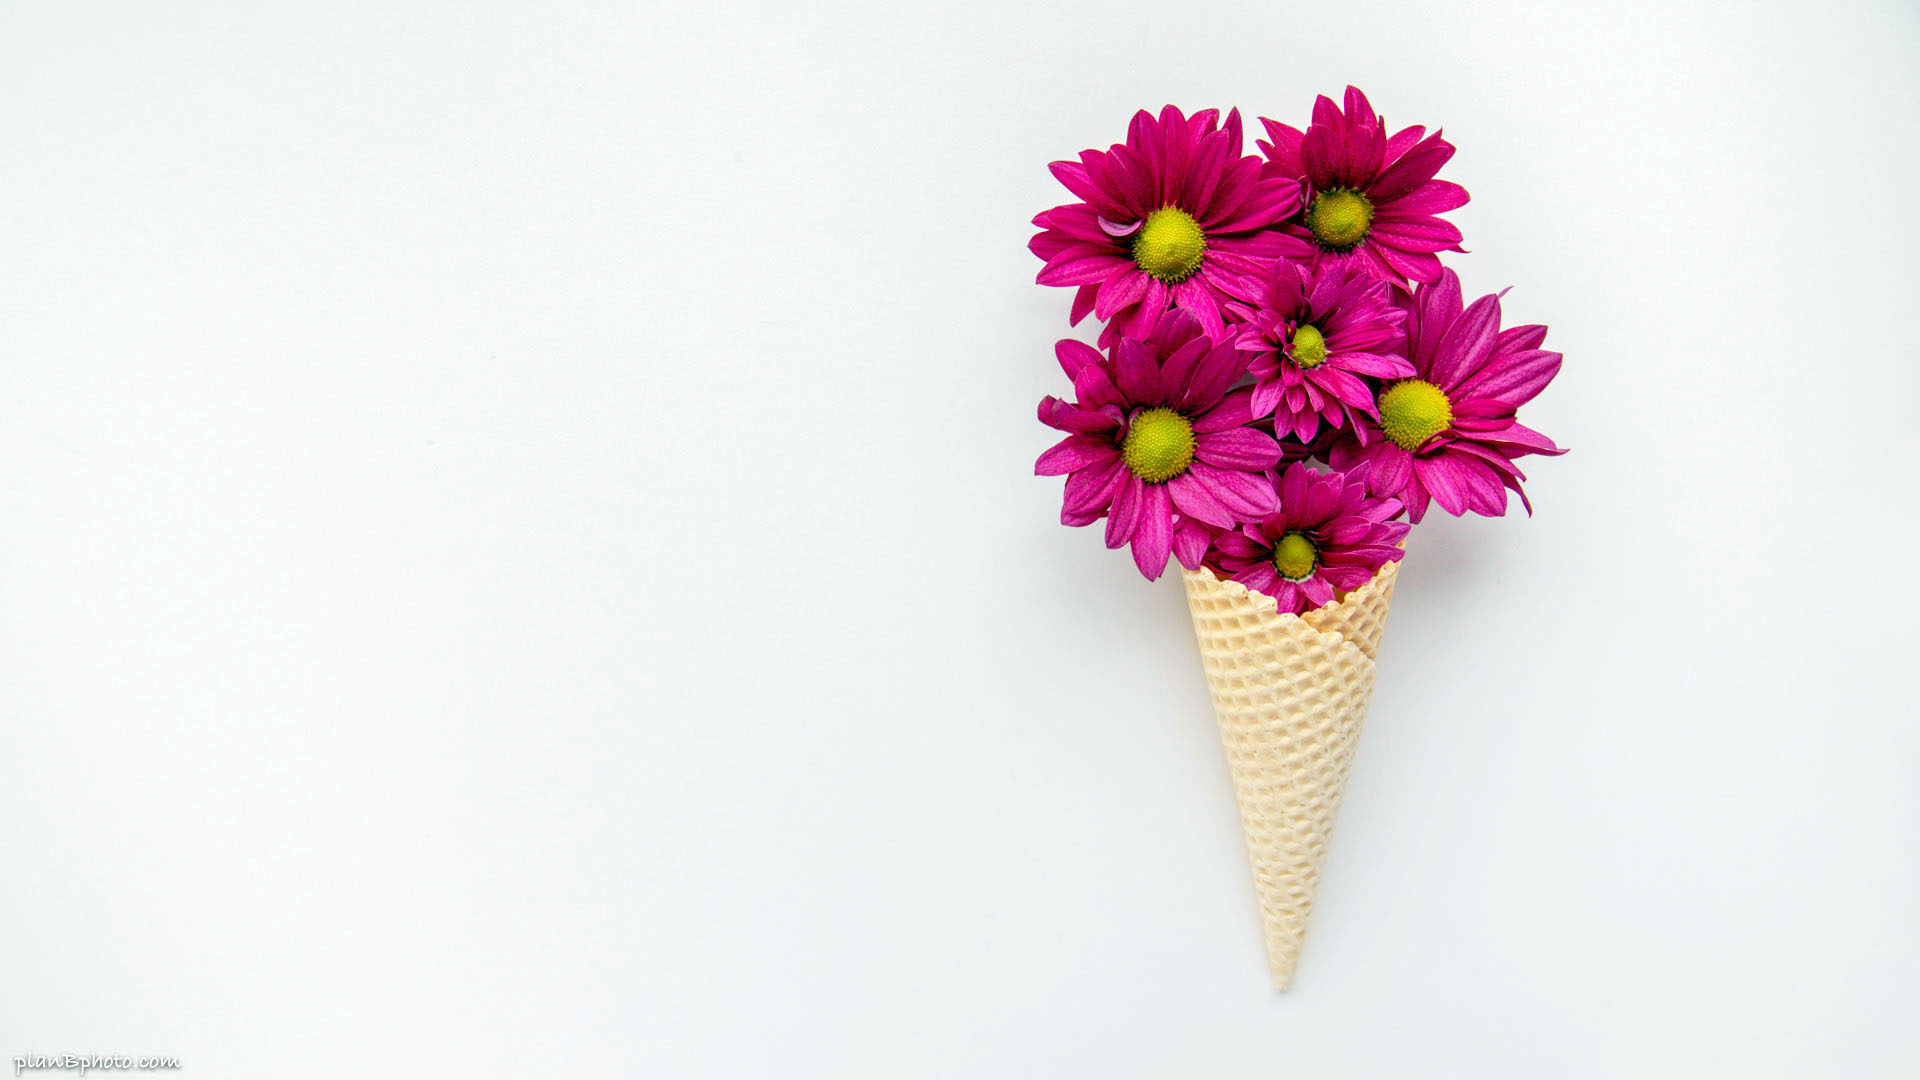 Magenta flowers in an ice cream cone